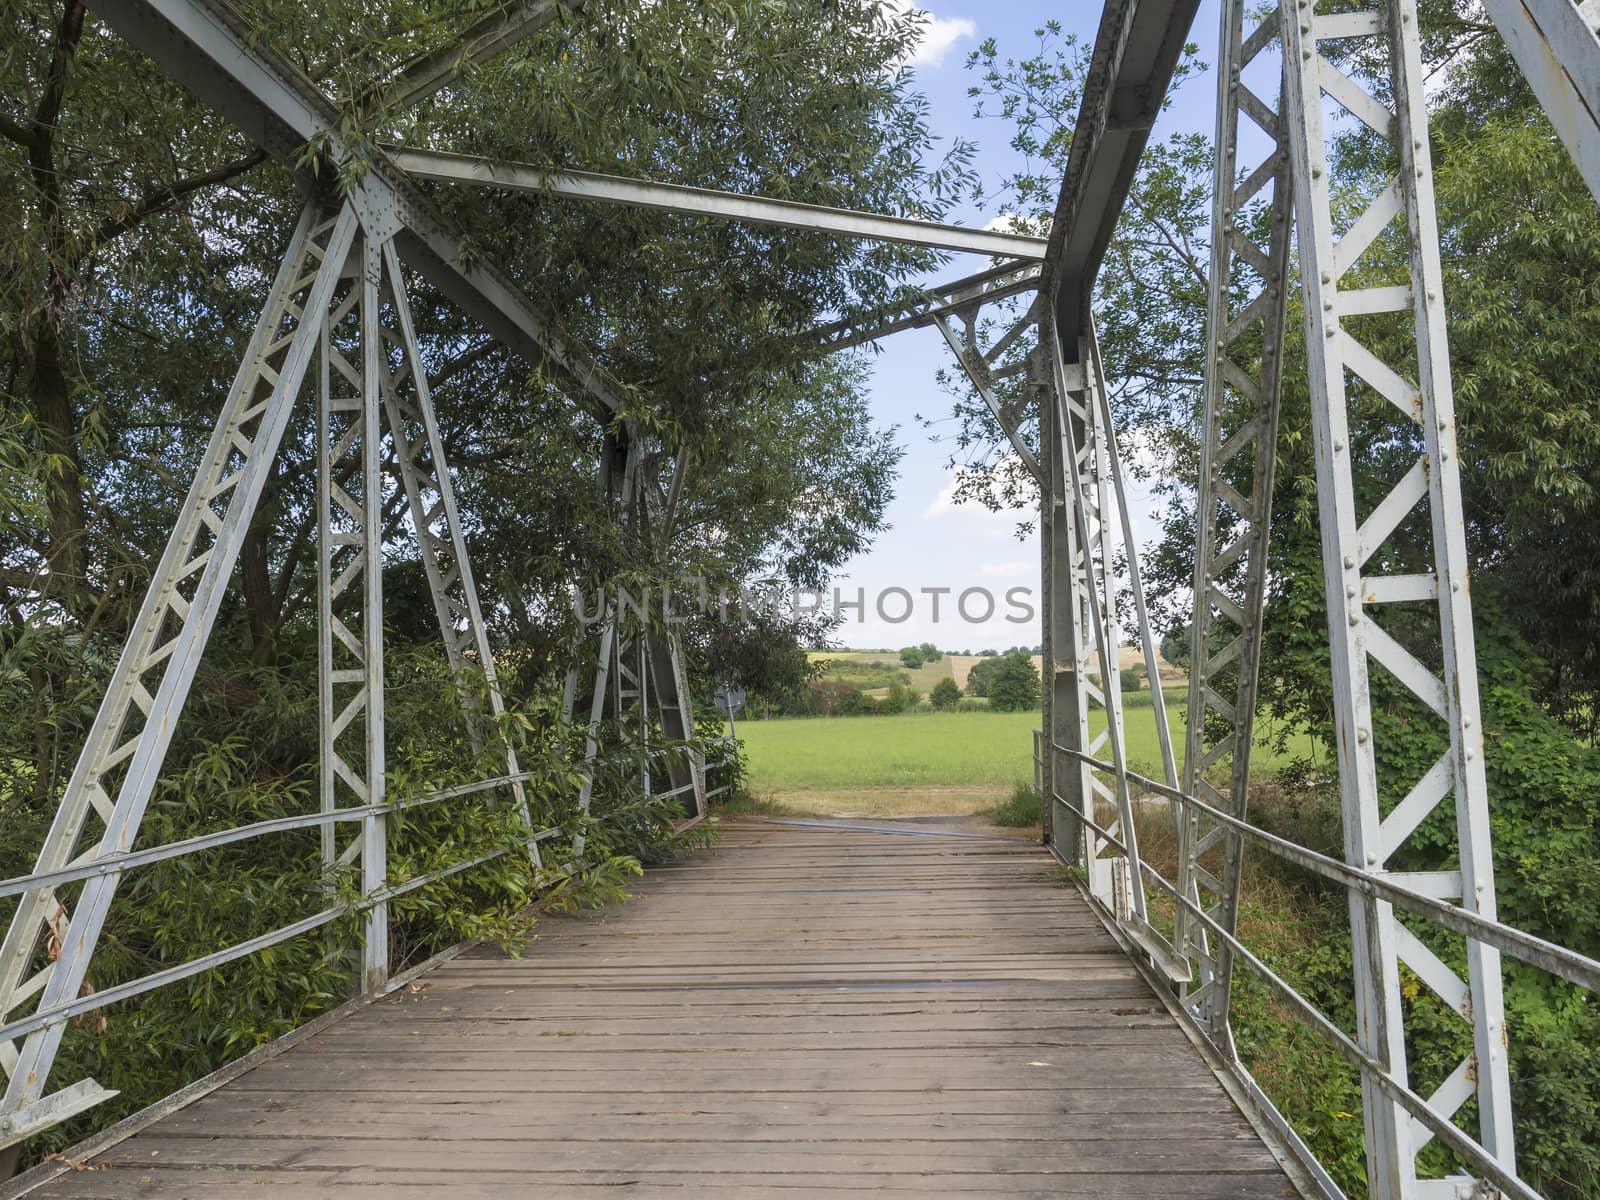 Footbridge across Jizera river made of wood and metal steel girder with view on trees and rural summer landscape by Henkeova